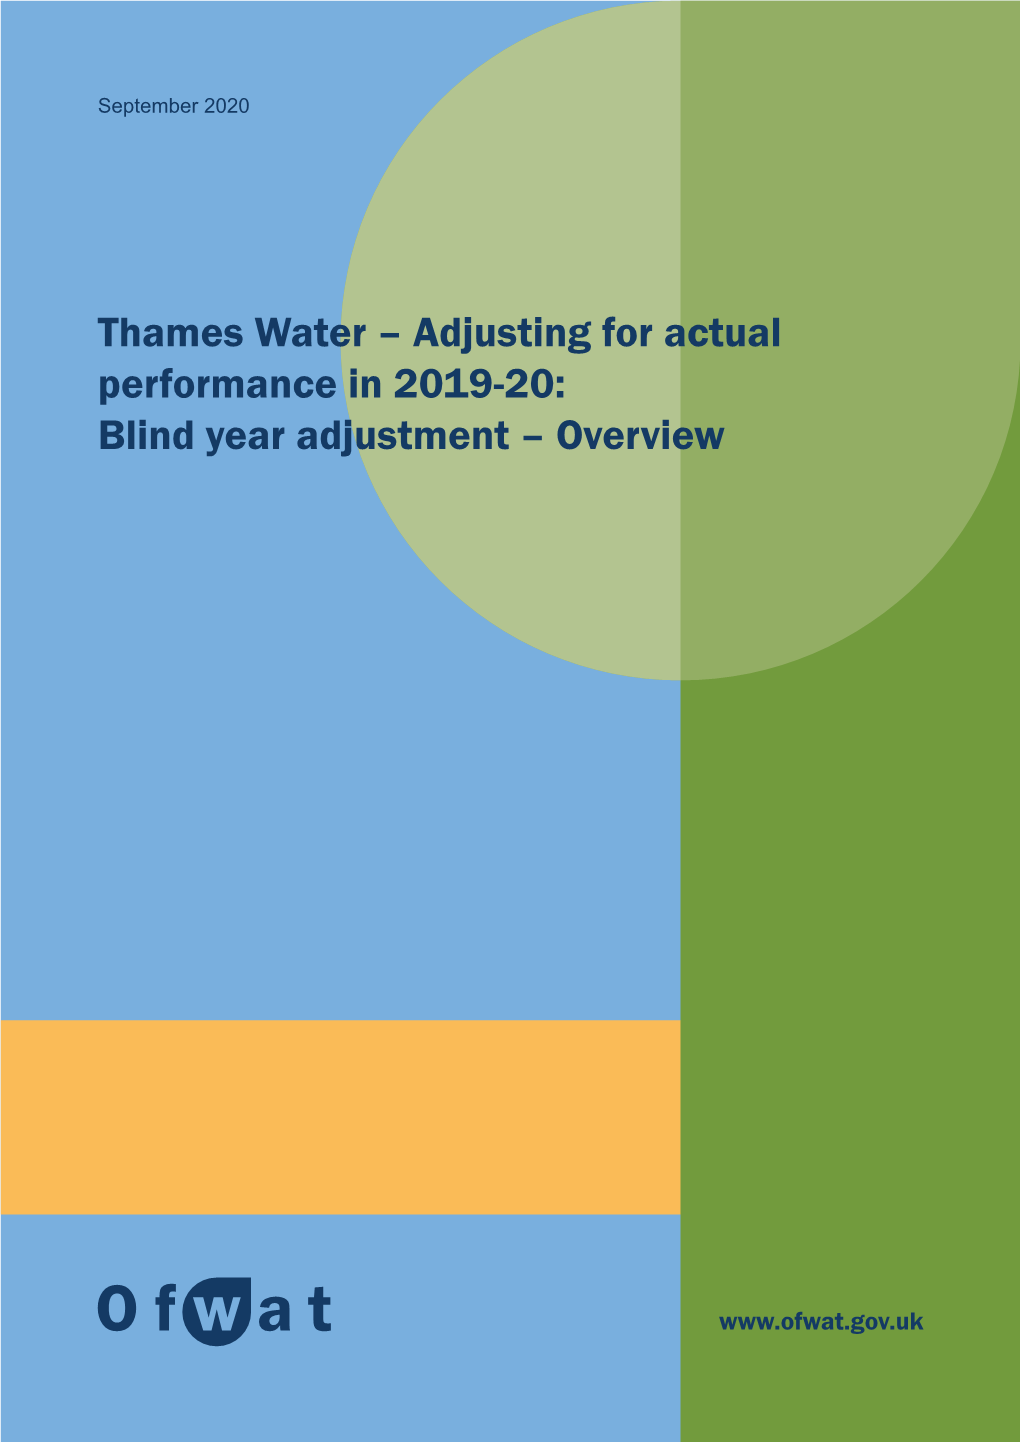 Thames Water – Adjusting for Actual Performance in 2019-20: Blind Year Adjustment – Overview